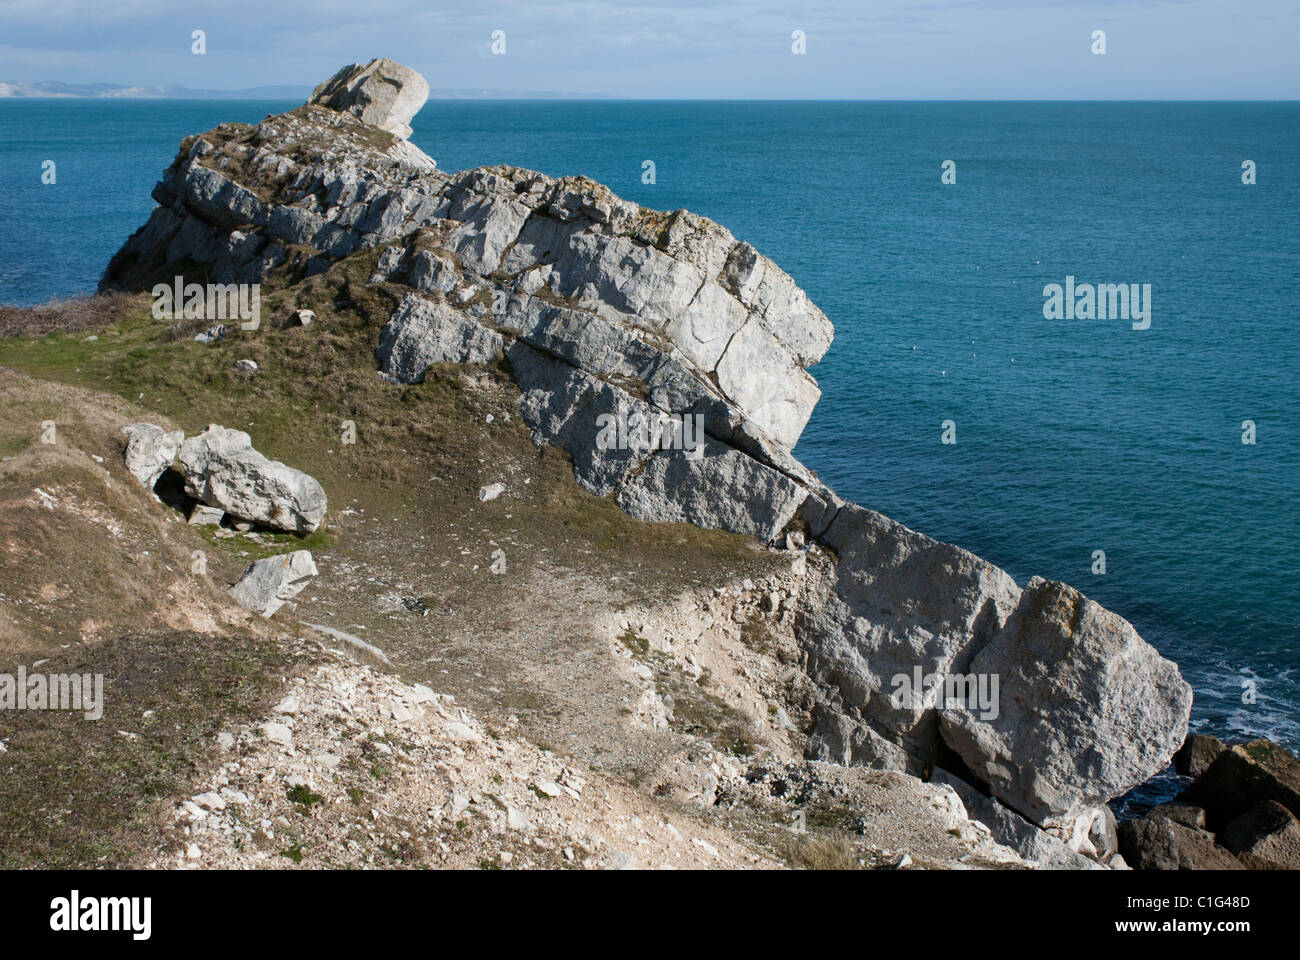 Eroded tilted strata of Portland stone on the coast of Portland in Dorset, UK, that look just like a wrecked or beached ship. Stock Photo